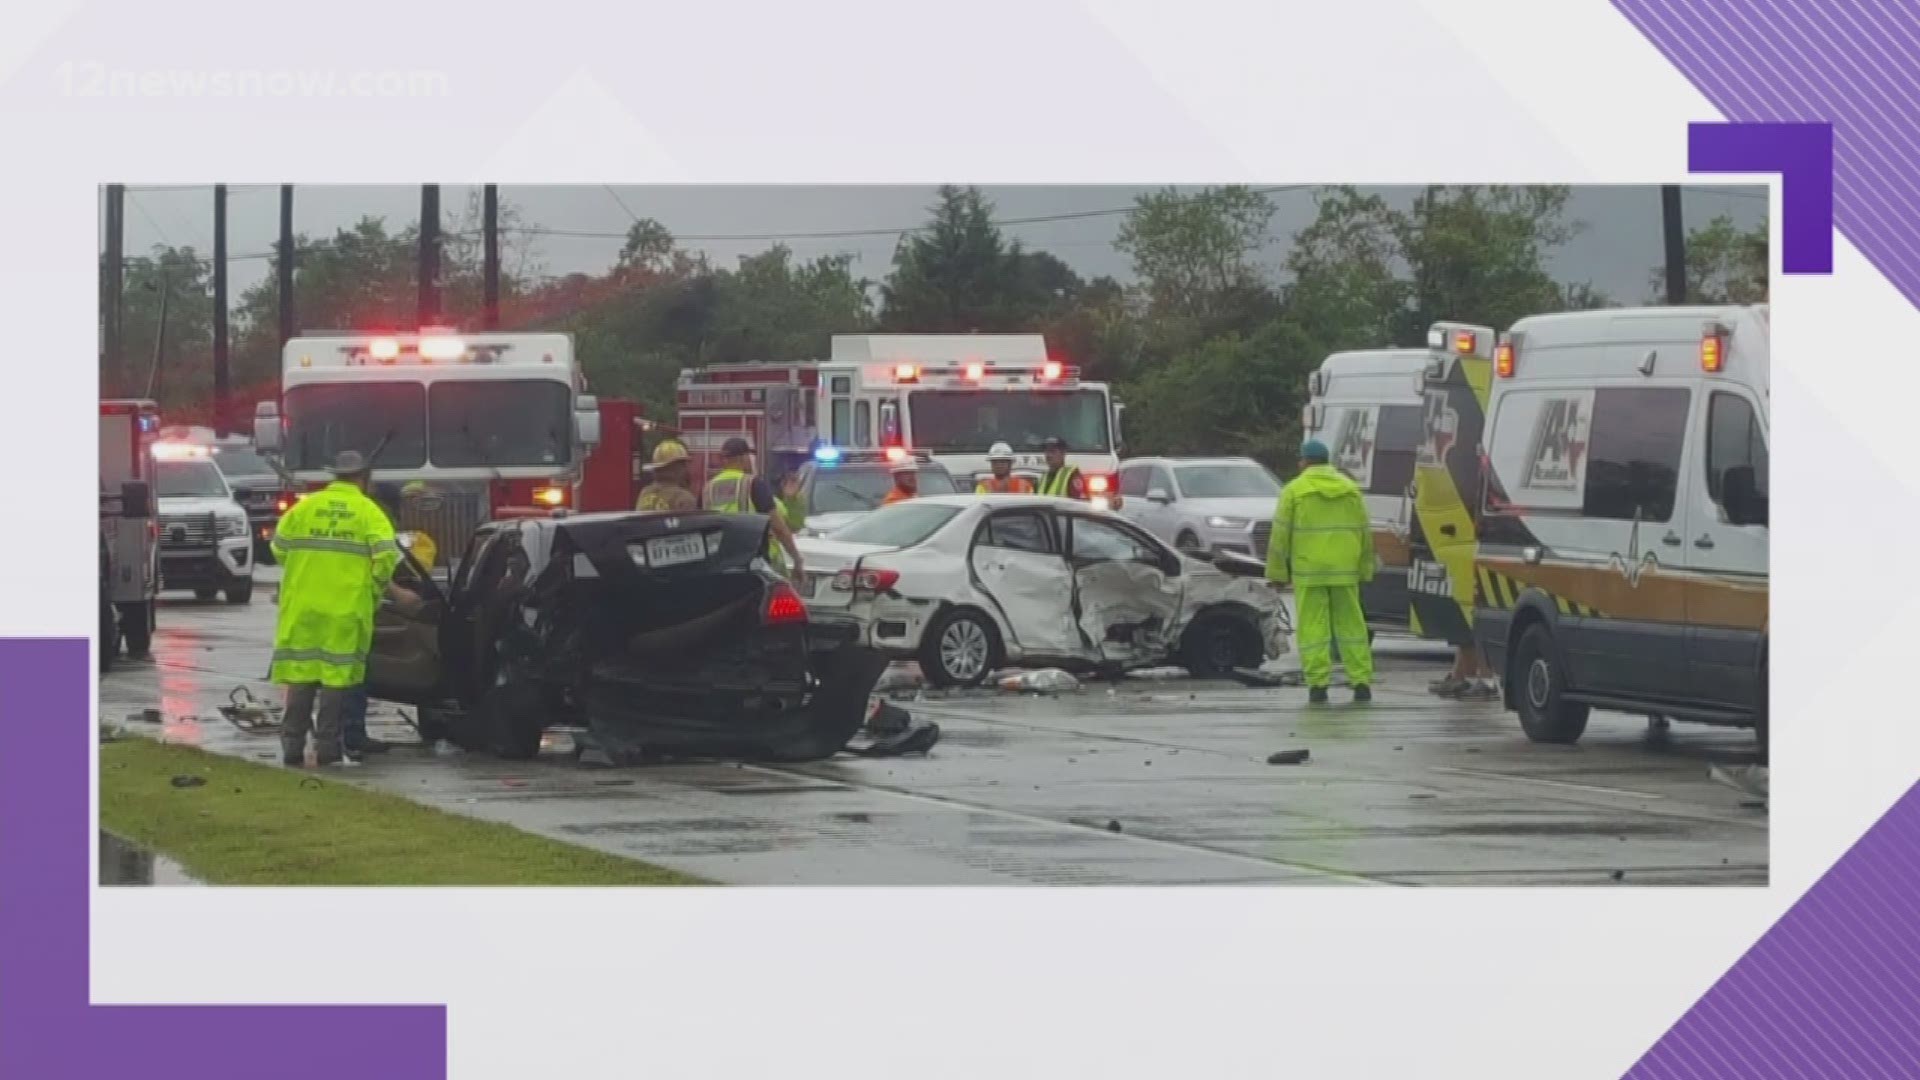 Four car accident in Orange County, four sent to hospital